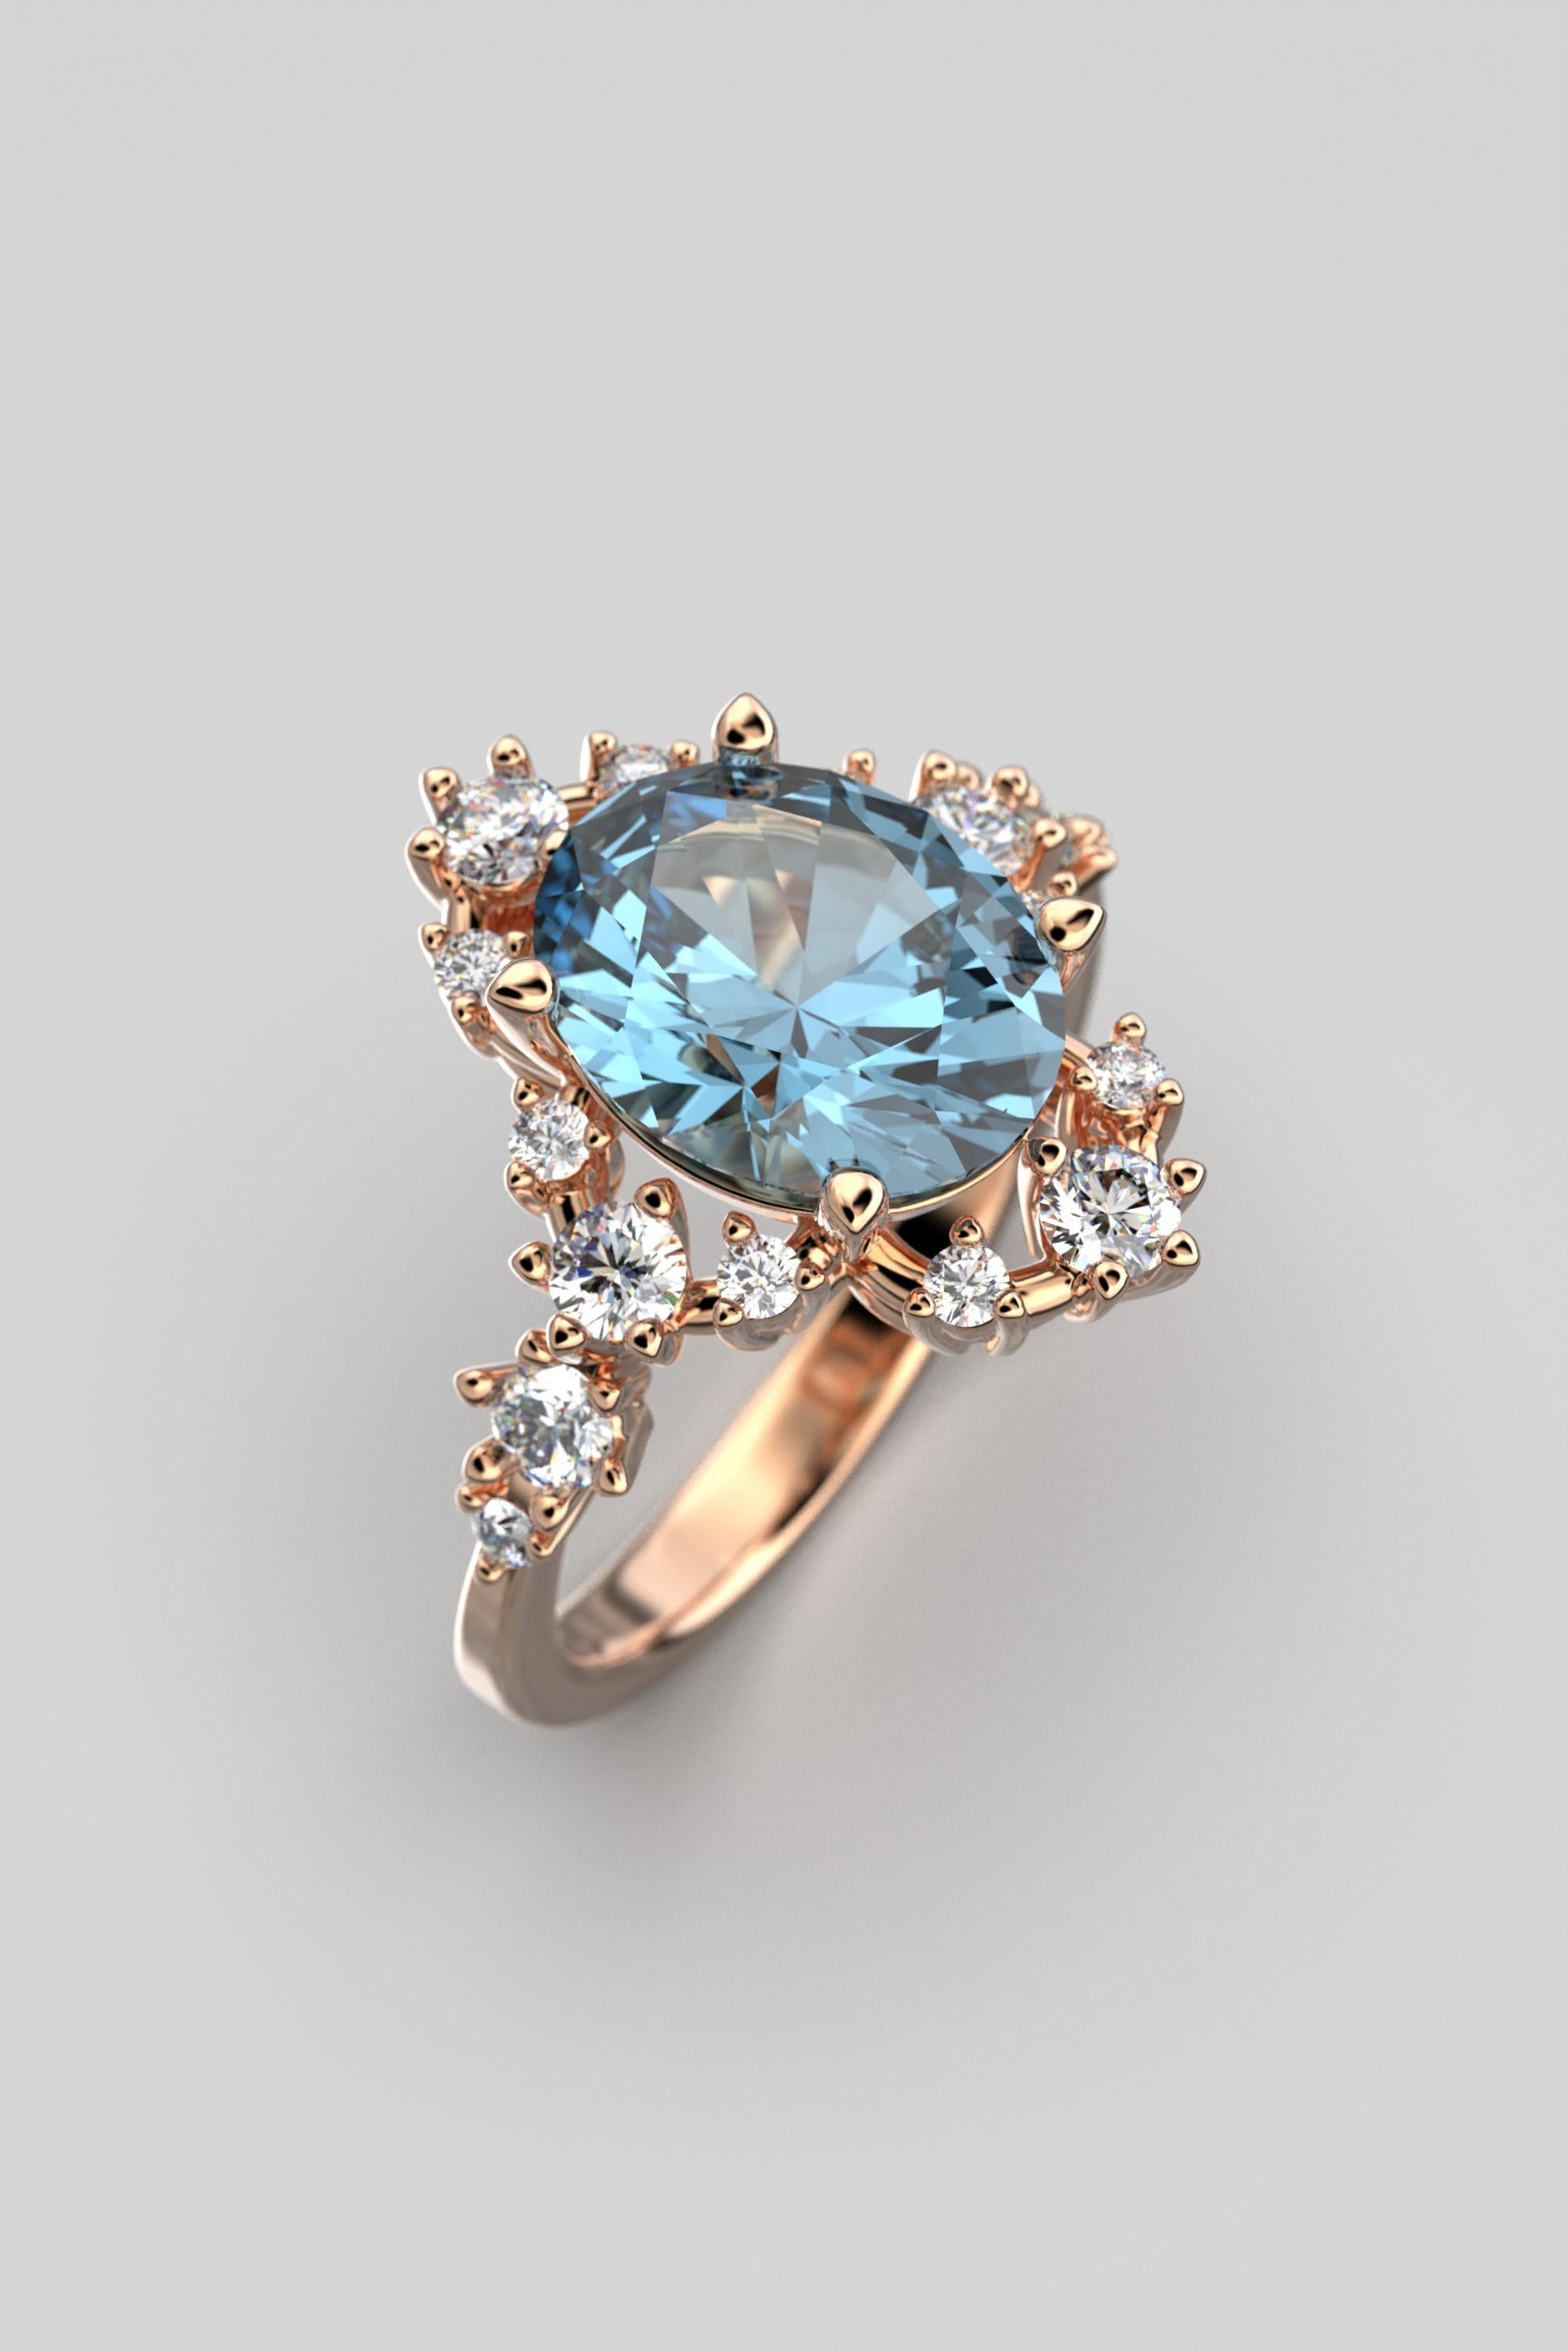 For Sale:  18k Gold Aquamarine Ring With Natural Diamonds Made in Italy Oltremare Gioielli 9